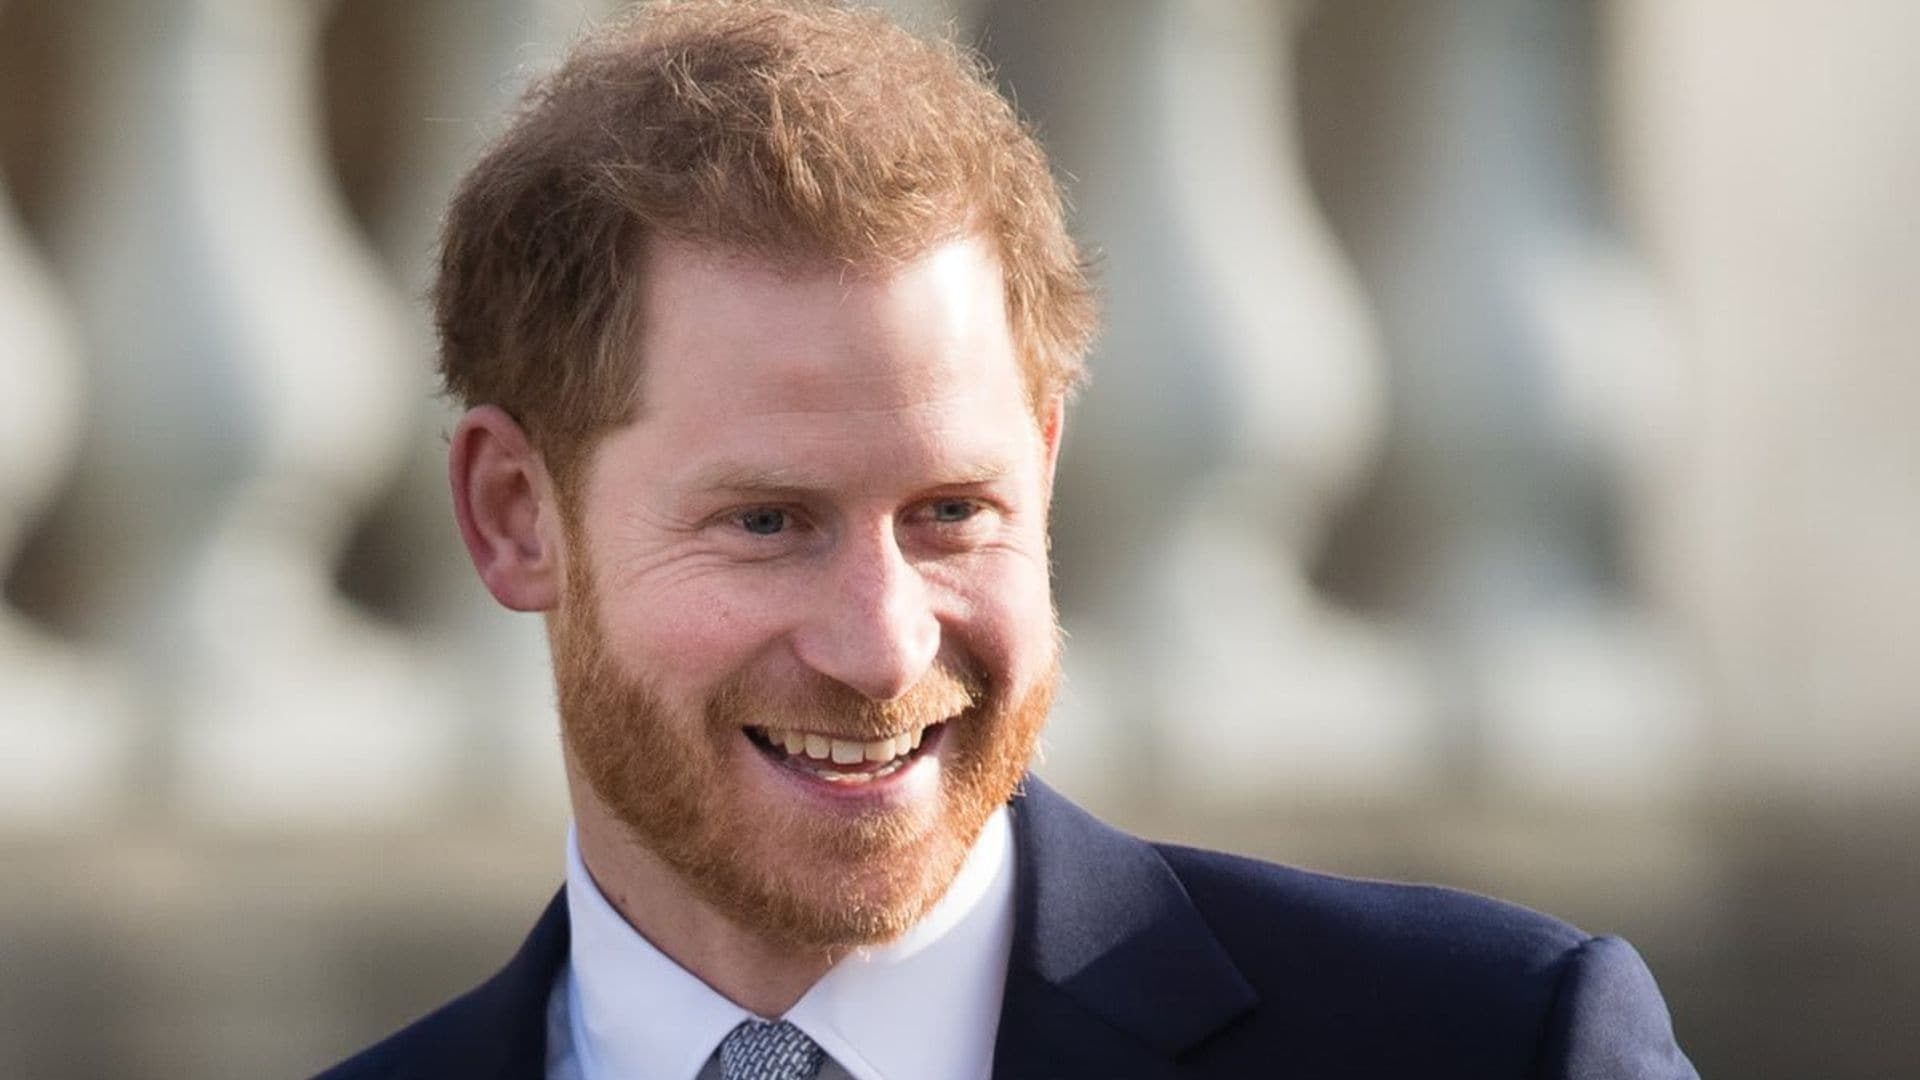 Prince Harry makes virtual surprise appearance in a tuxedo